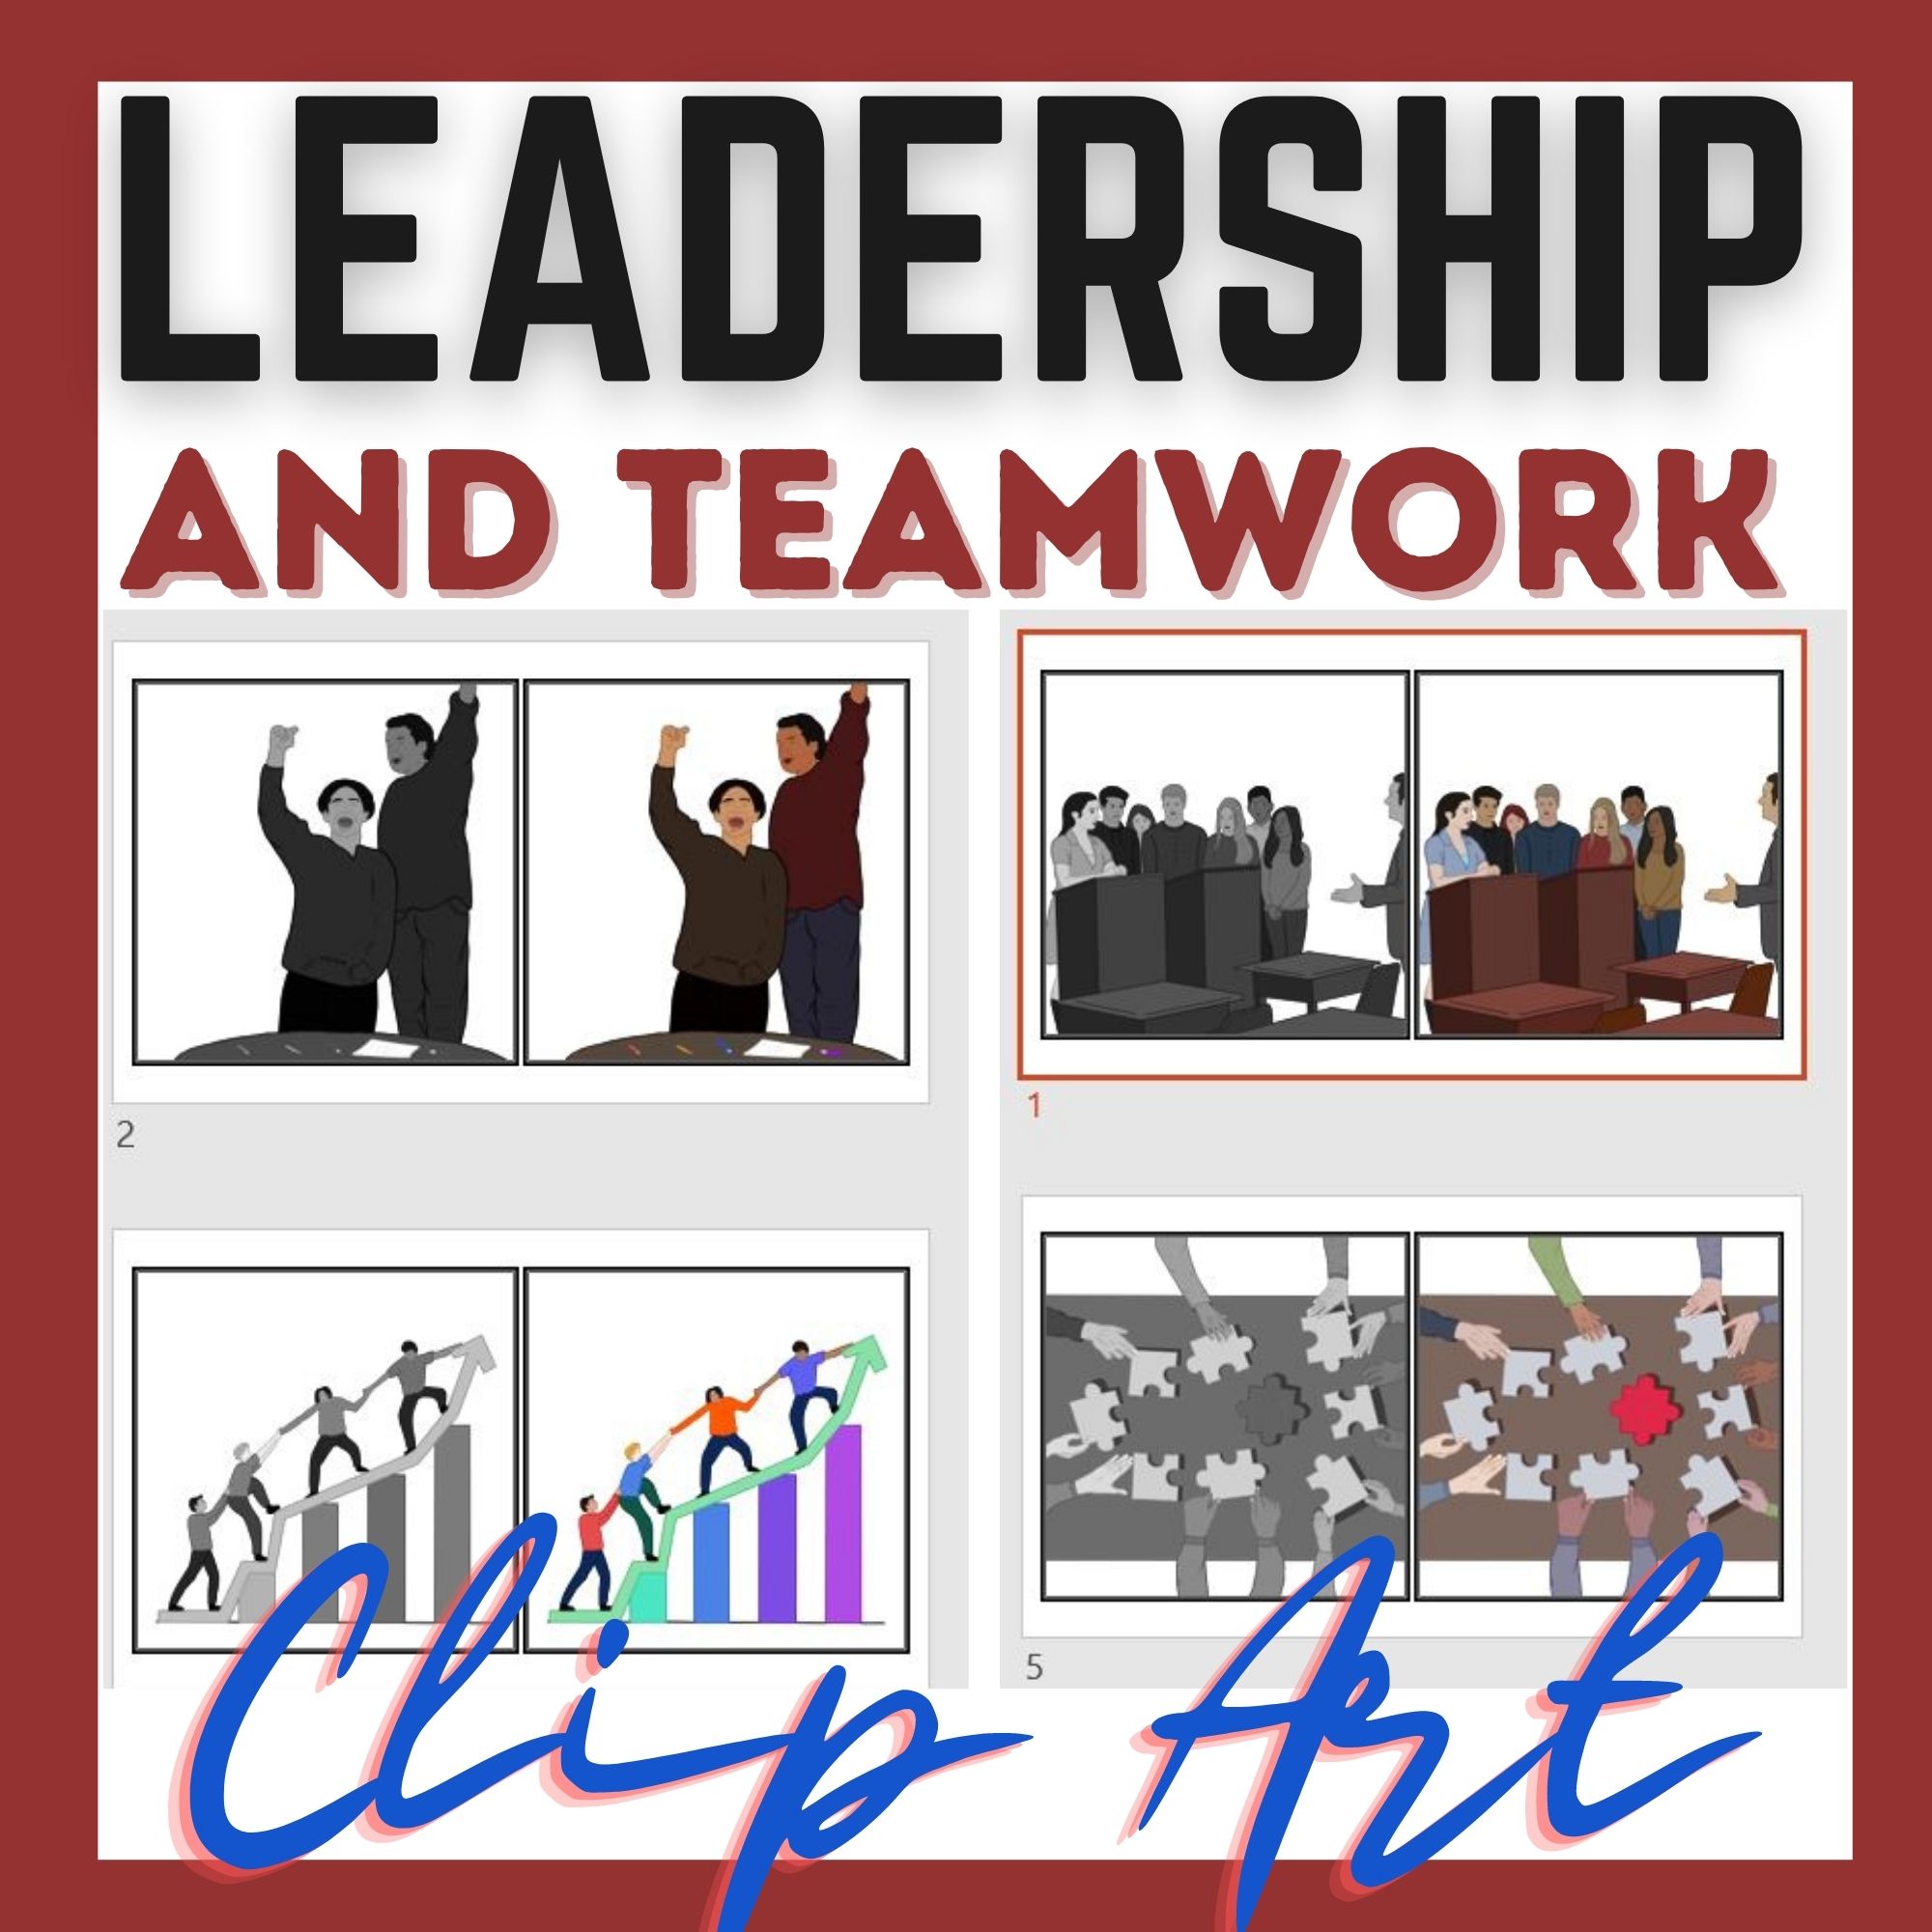 Leadership Clip Art Images - Free Download on Clipart LIbrary - Clip ...